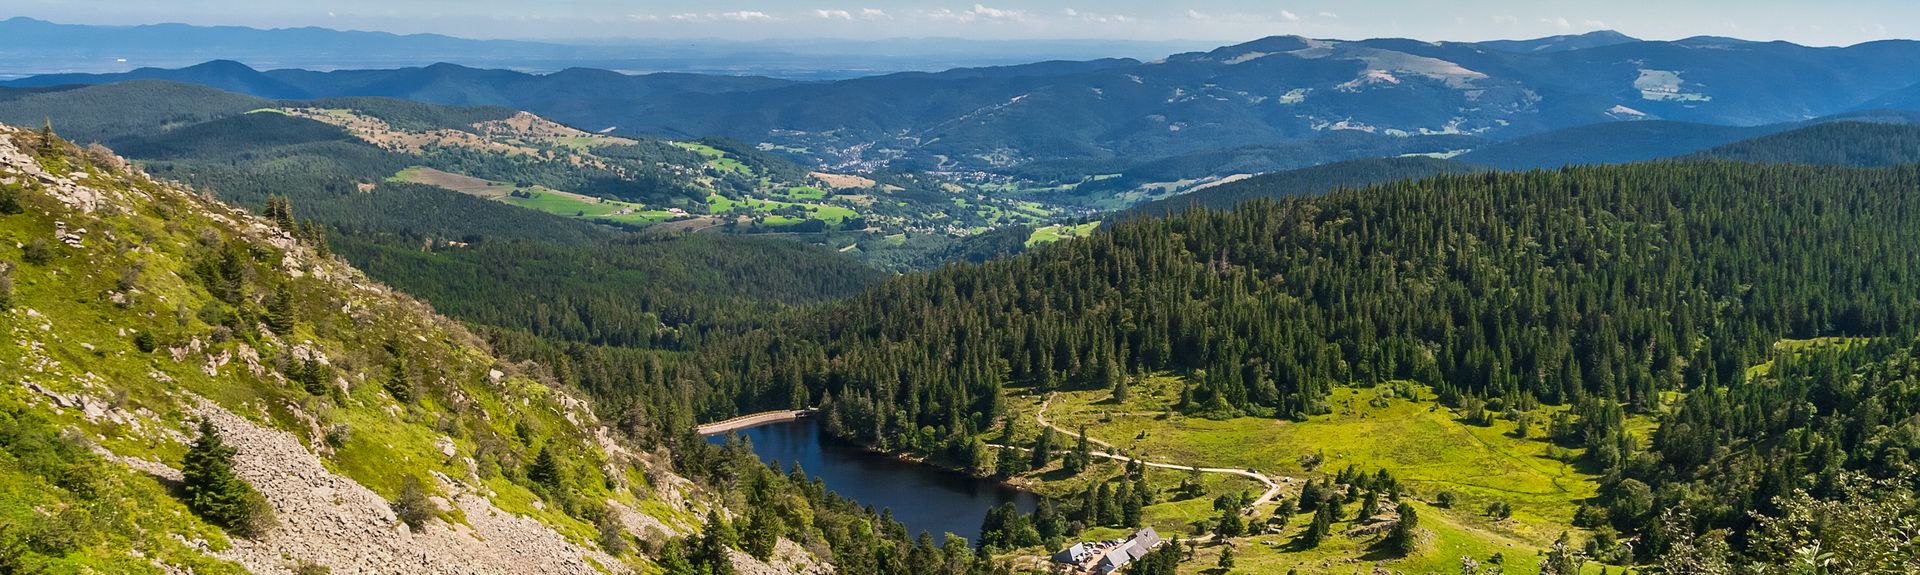 Vosges, FR holiday lettings: Chalets & more | HomeAway